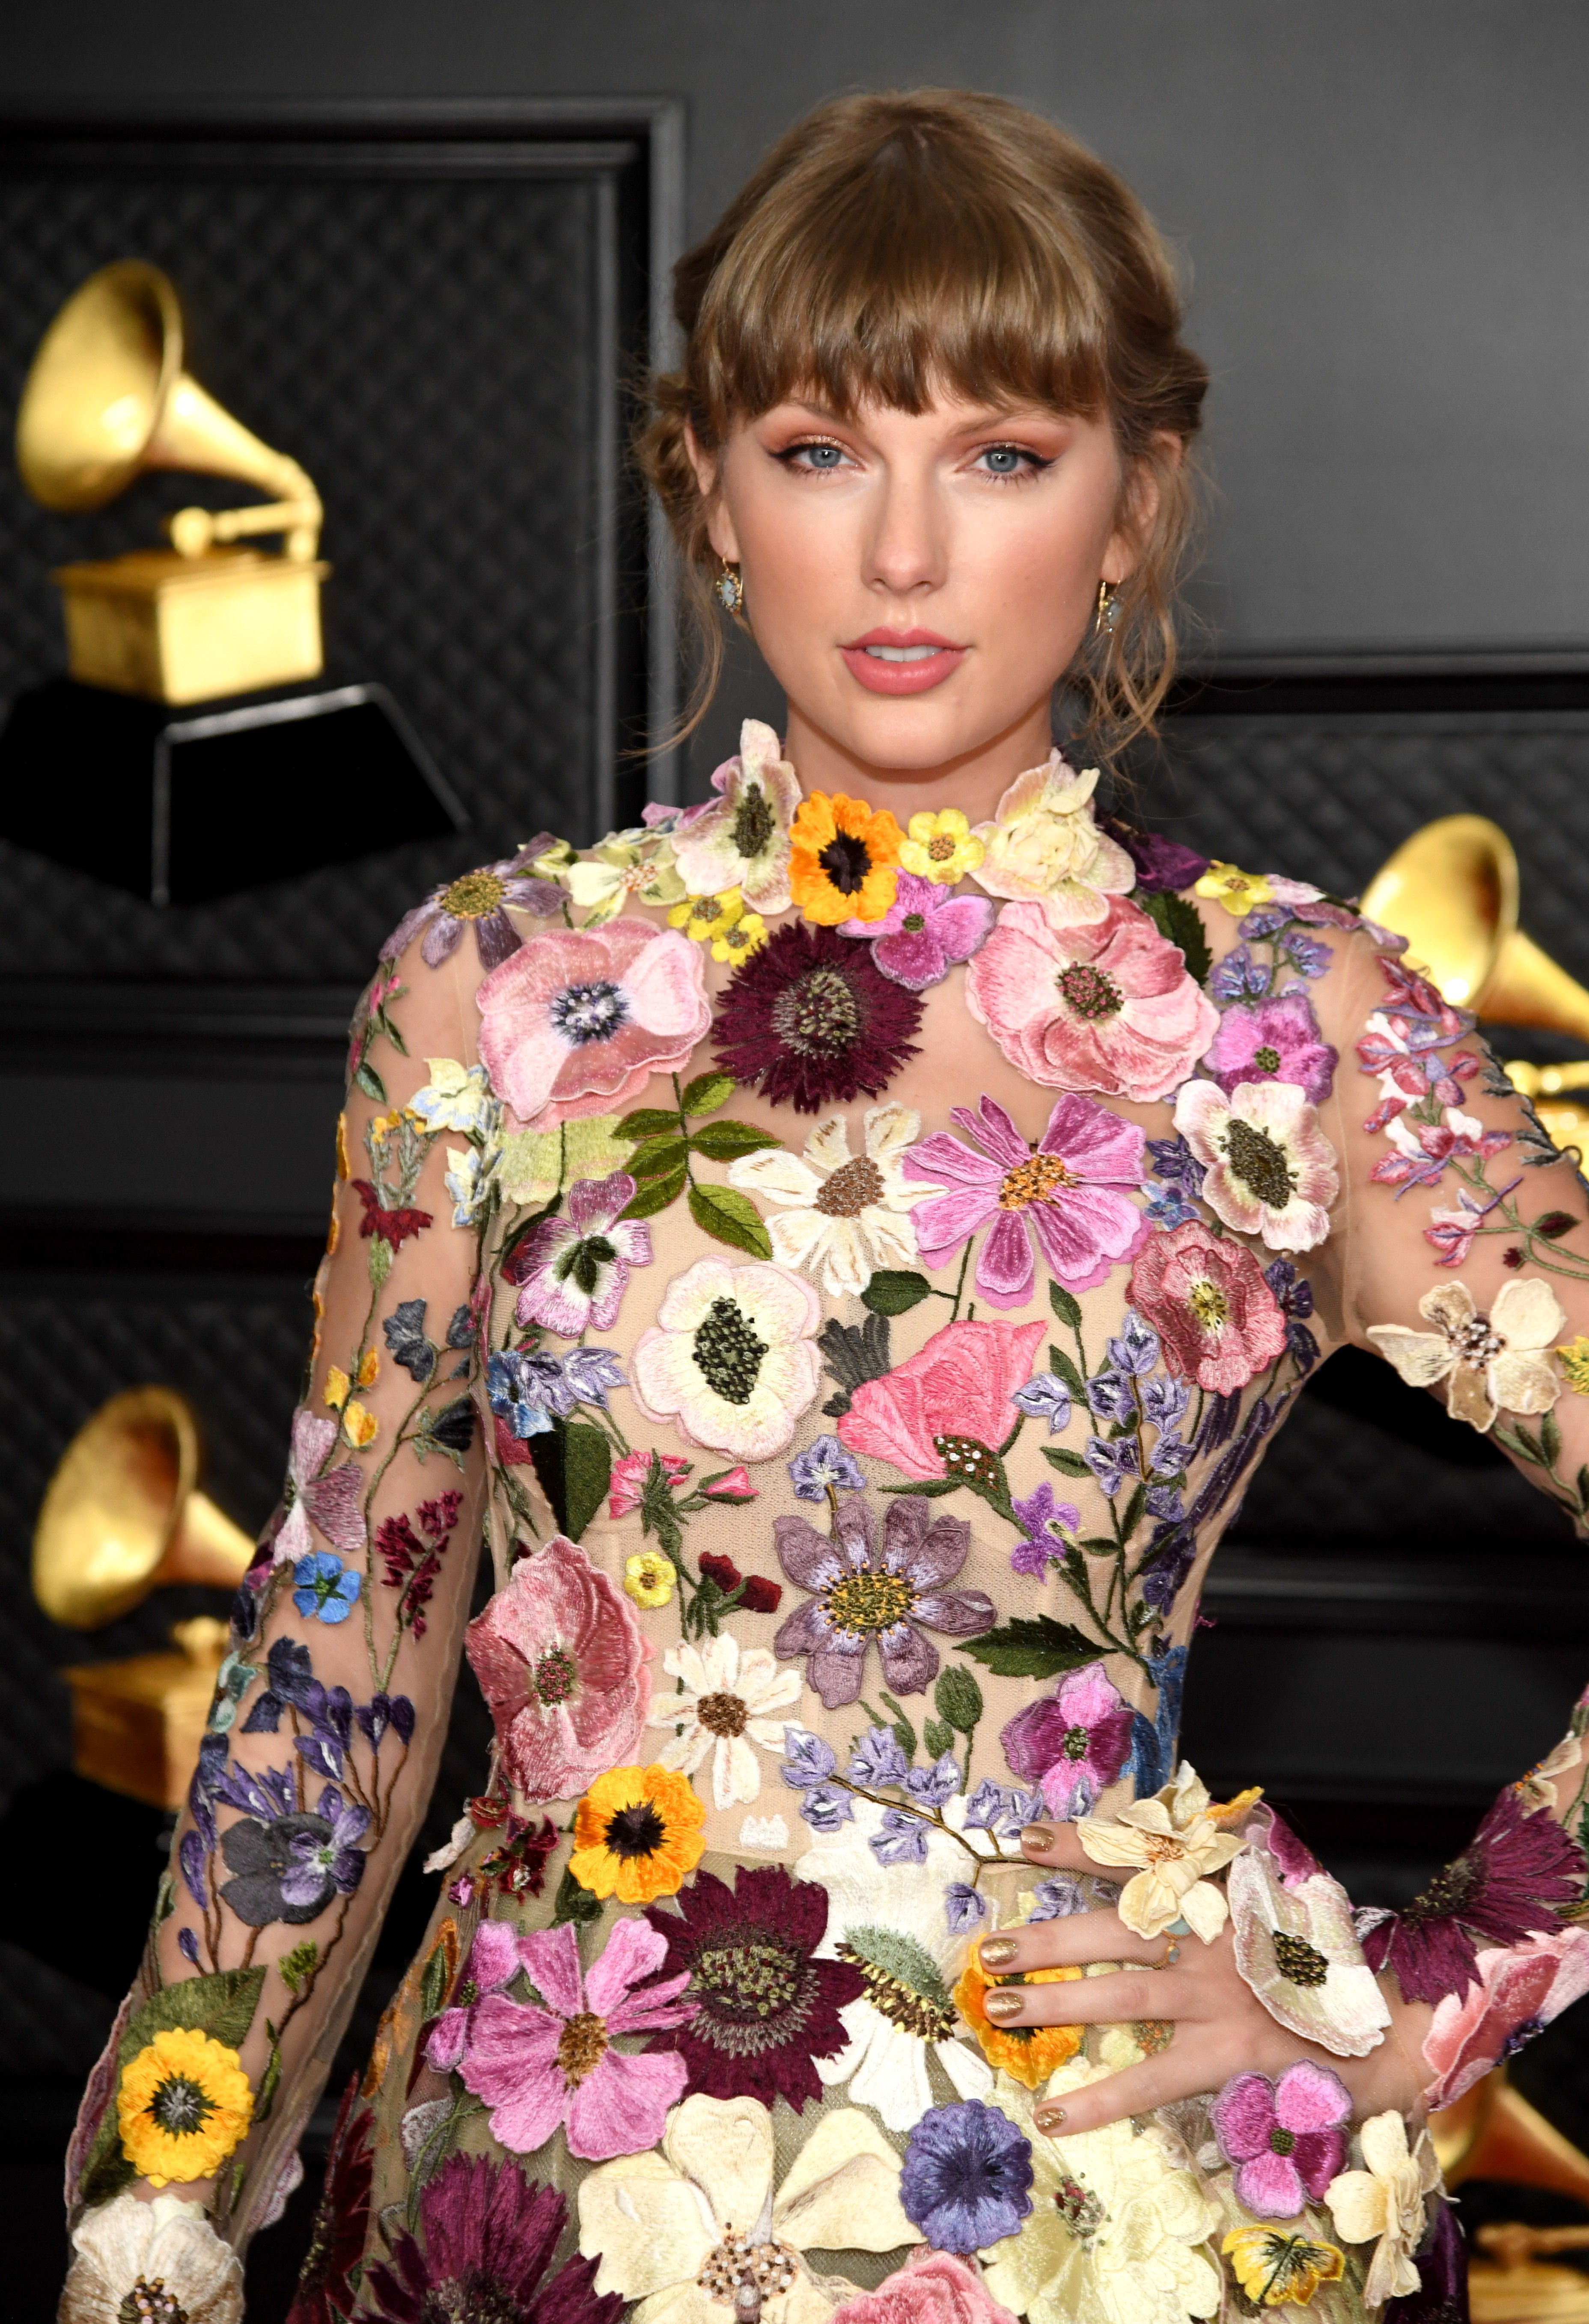 LOS ANGELES, CALIFORNIA - MARCH 14: Taylor Swift attends the 63rd Annual GRAMMY Awards at Los Angeles Convention Center on March 14, 2021 in Los Angeles, California. (Photo by Kevin Mazur/Getty Images for The Recording Academy ) (Foto: Getty Images for The Recording A)